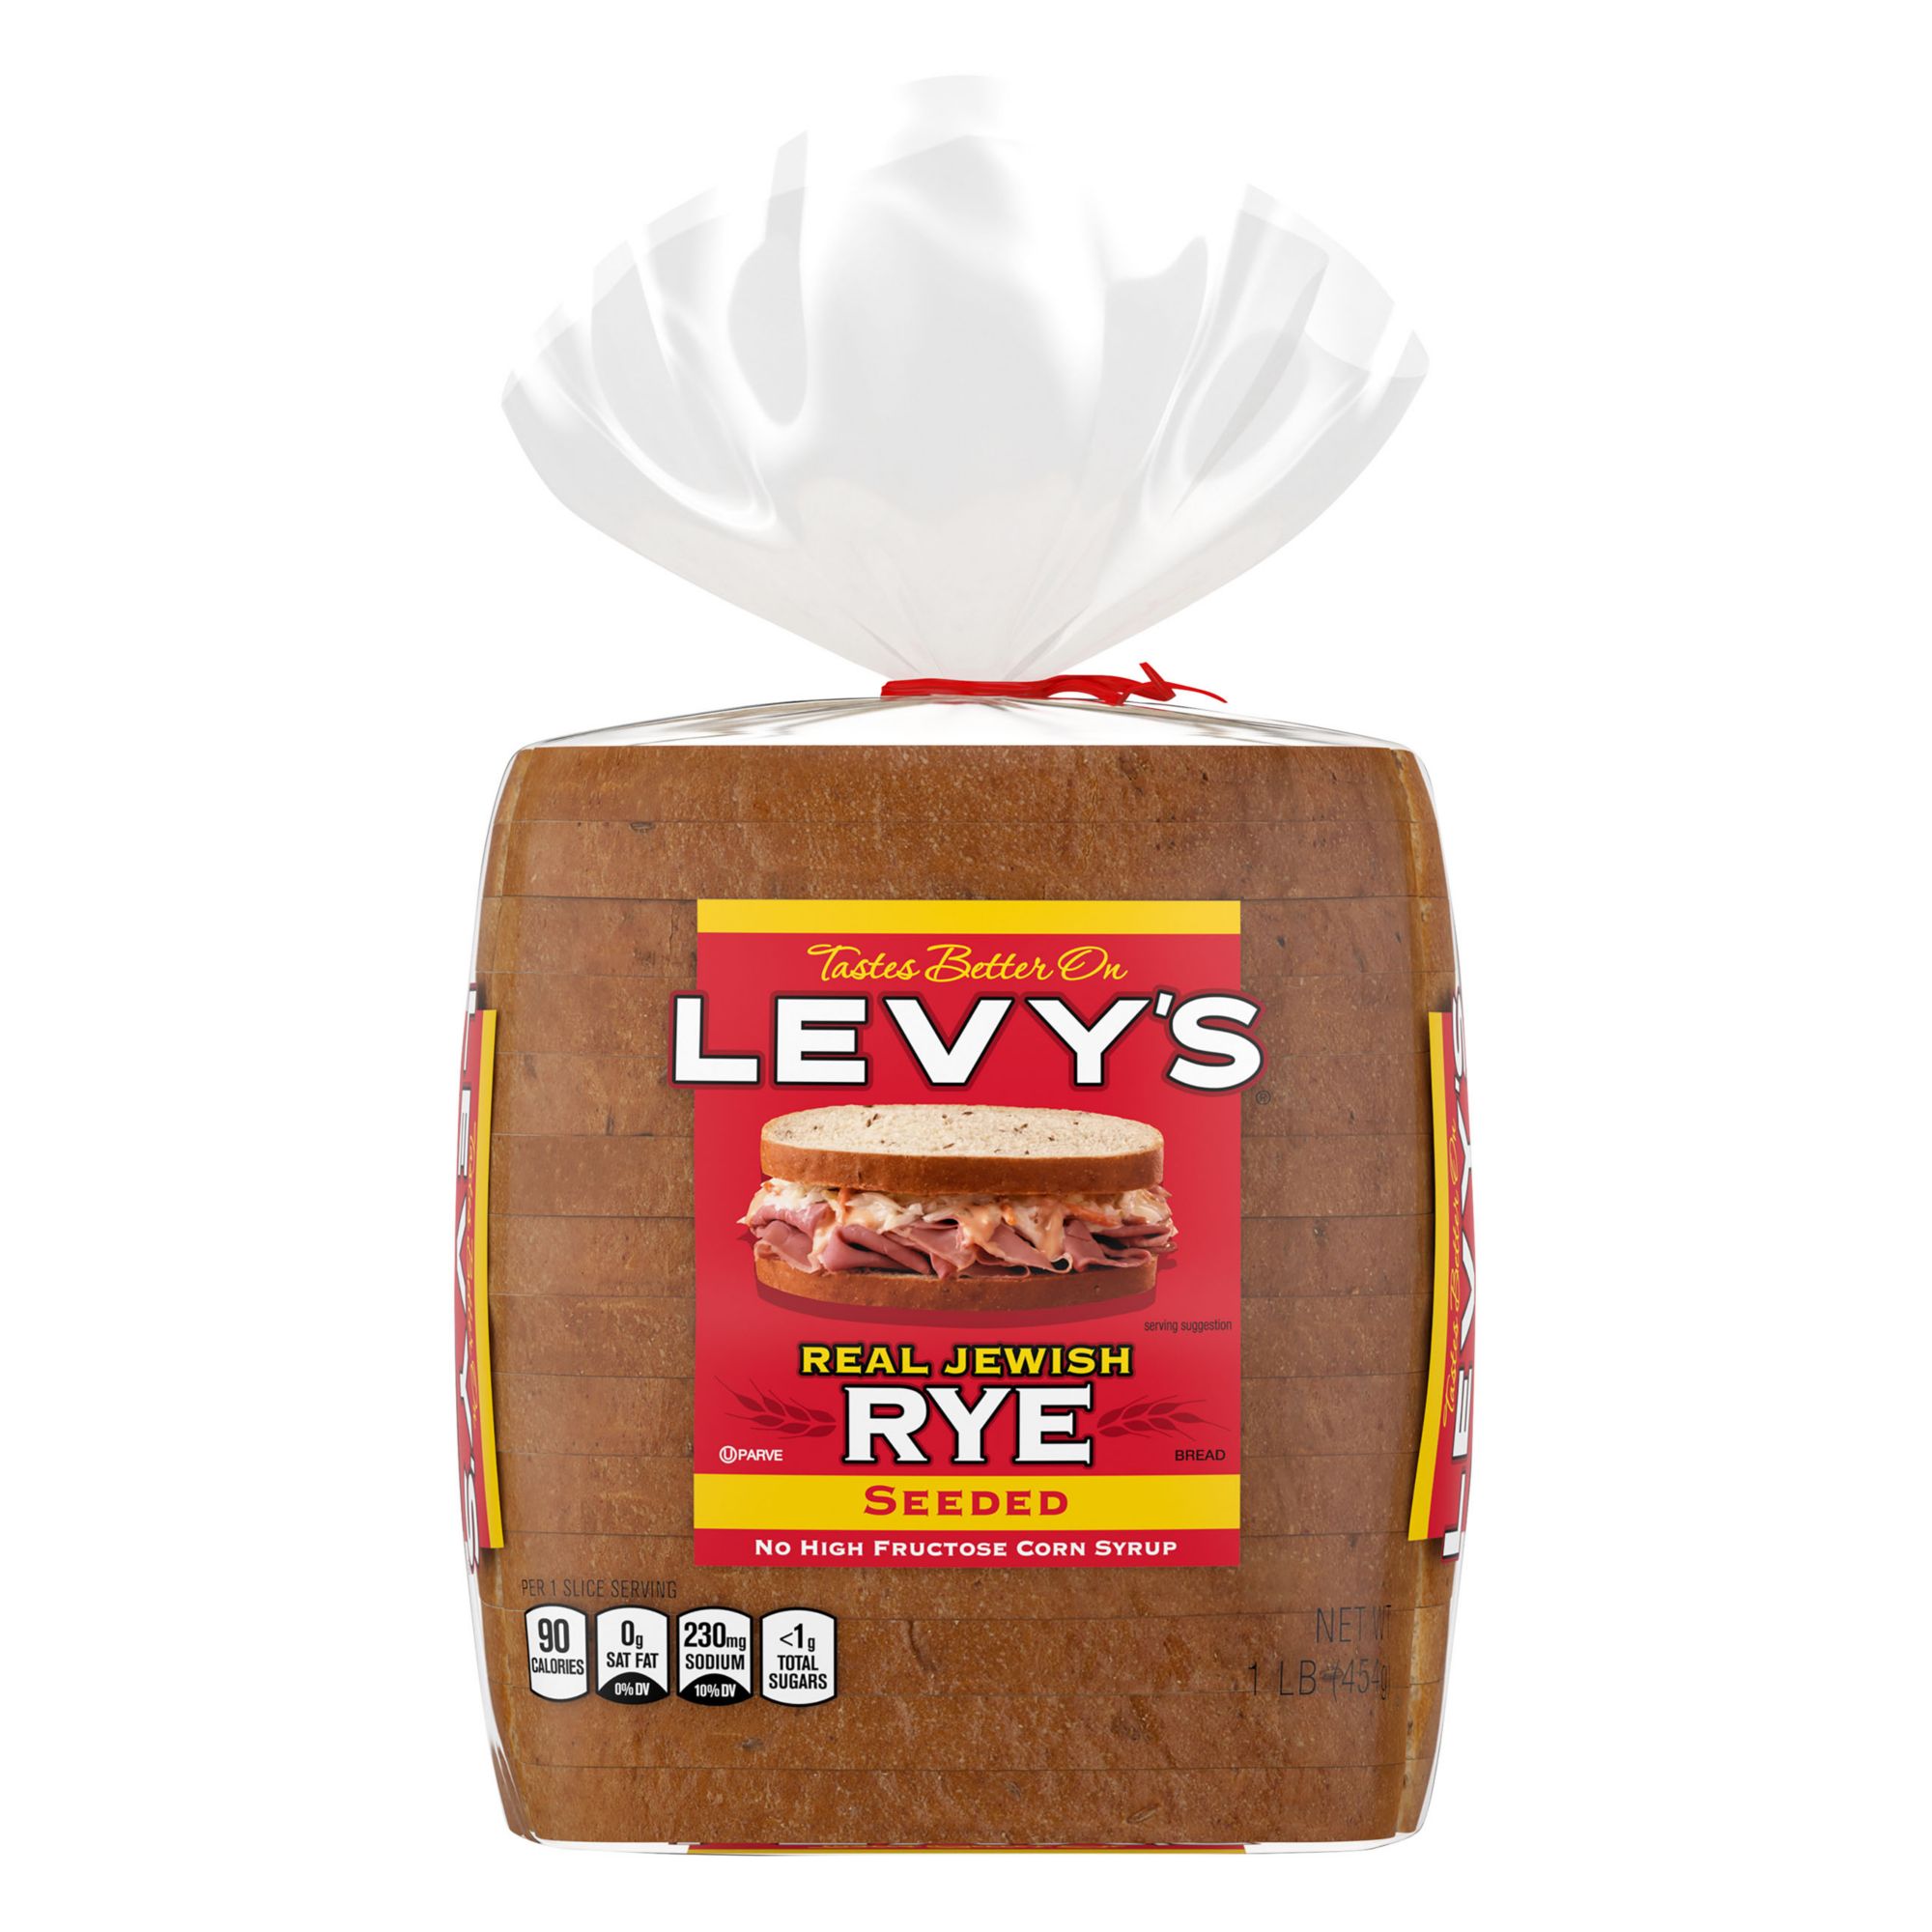 Levy's Hearty Seeded Rye Bread, 16 oz. - BJs Wholesale Club